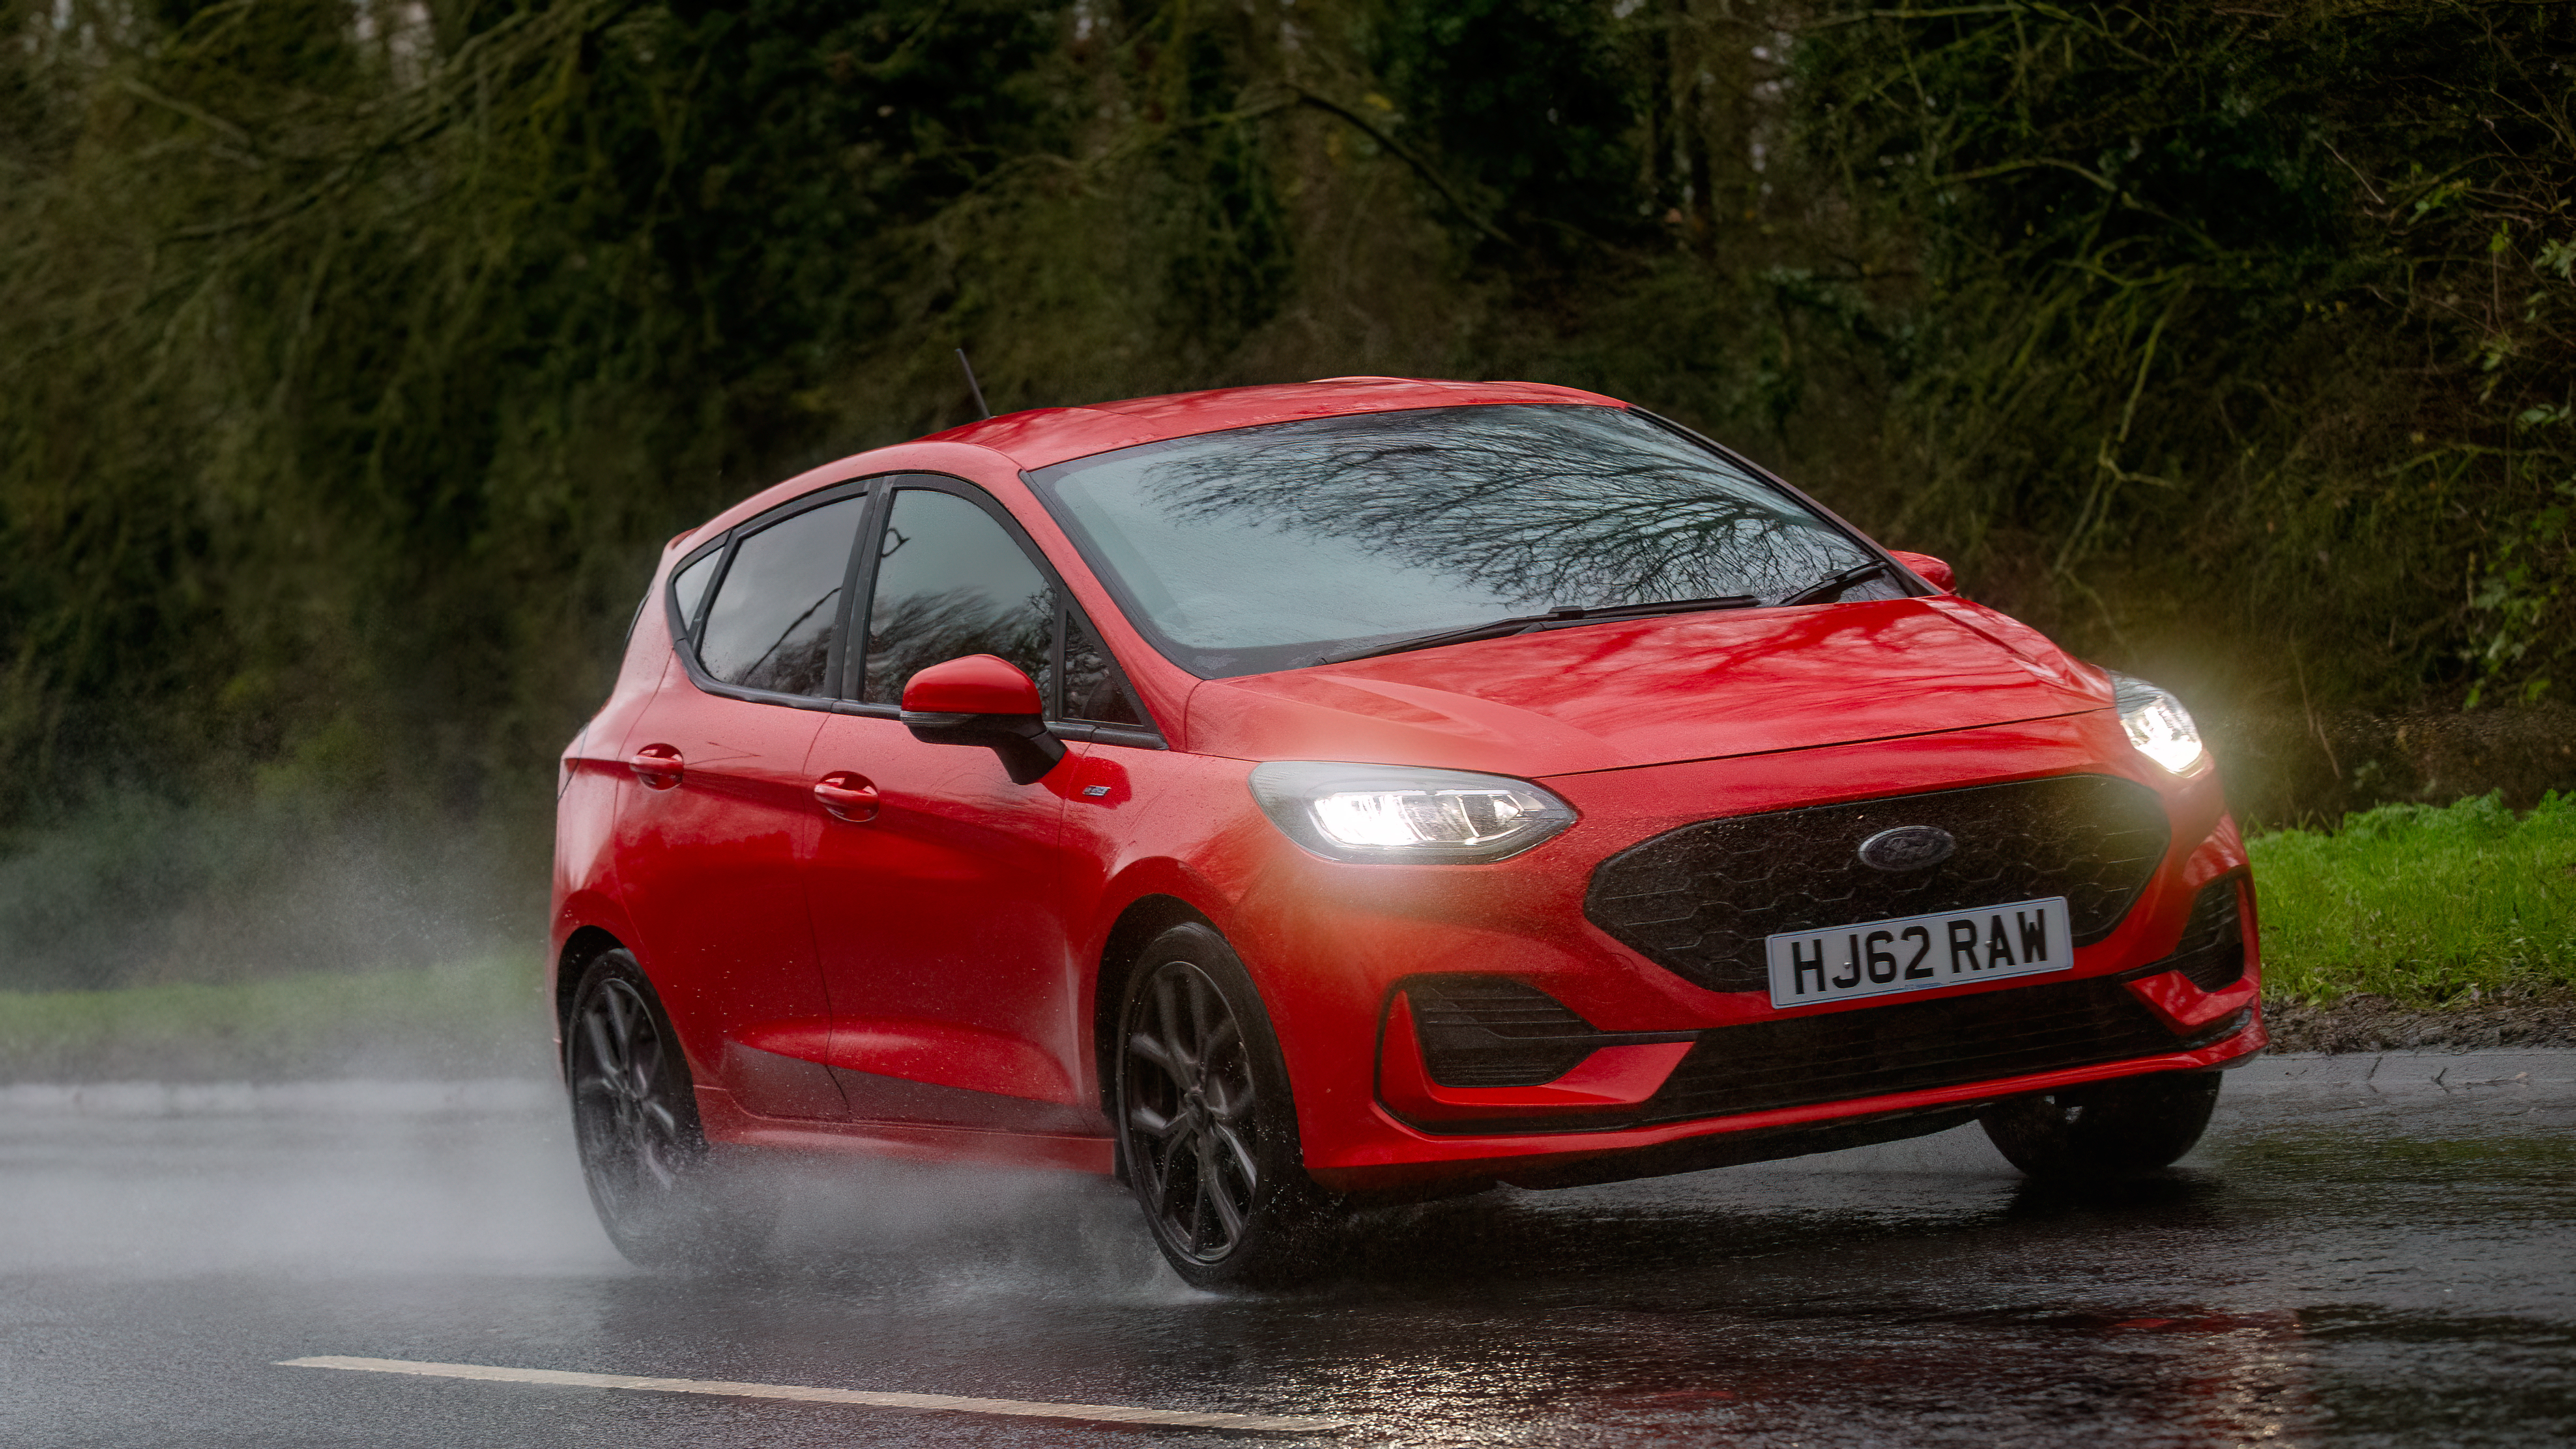 The Ford Fiesta has long been a stalwart motor